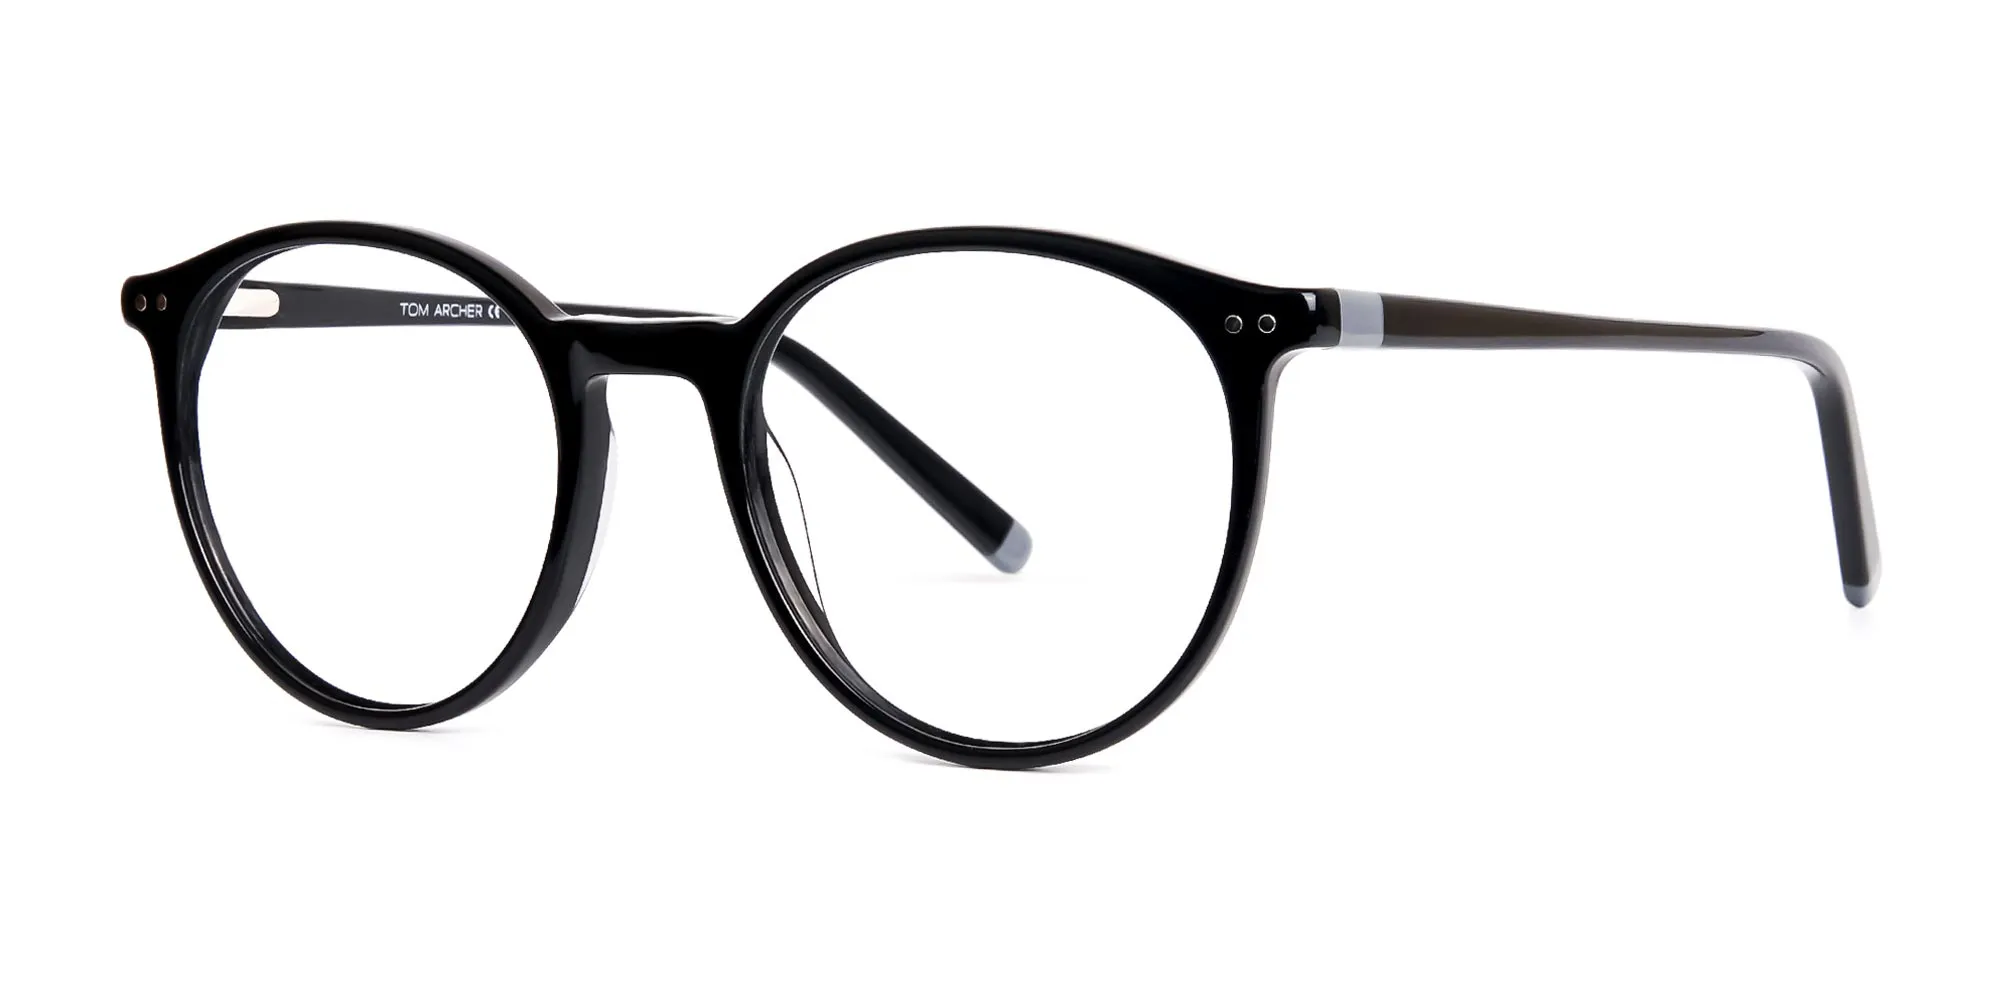 black and silver round glasses frames